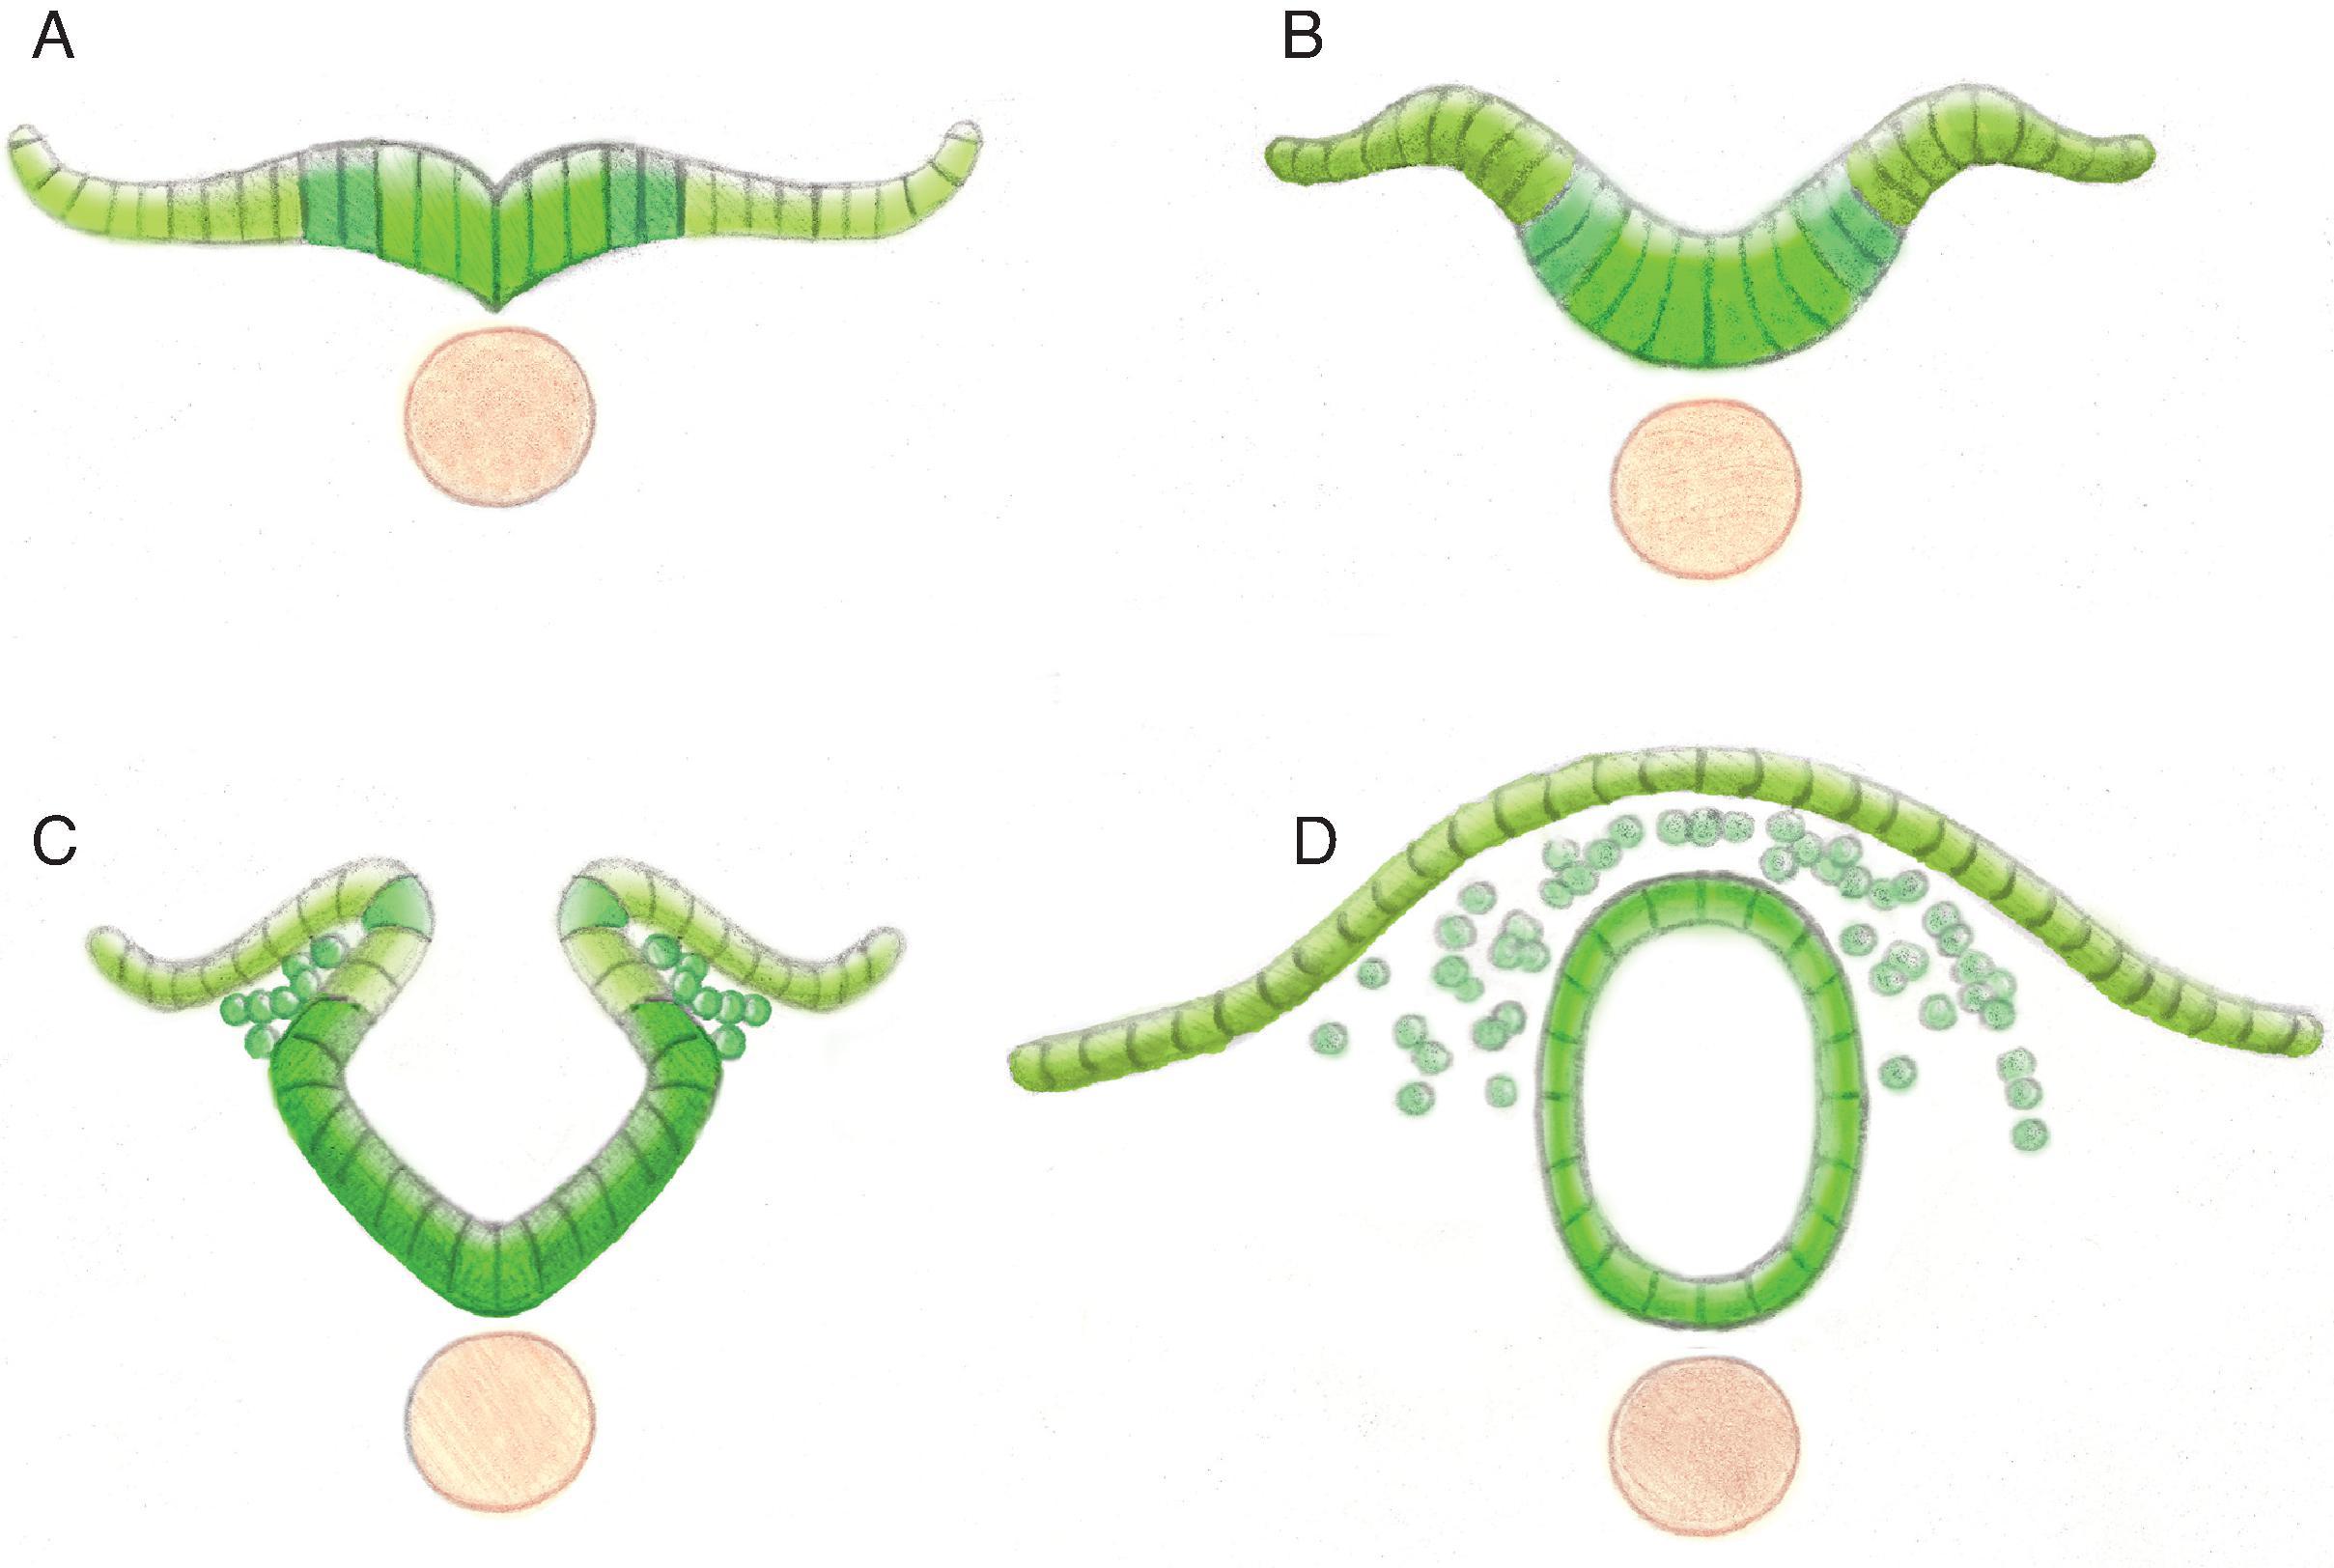 Primary Neurulation (Weeks 3–4). The notochord interacts with the overlying ectoderm to form the neural plate (A). The neural plate then bends to begin formation of the neural tube (B). Continued infolding of neural plate (C). Disjunction is the separation of the neural tube from the ectoderm (D).